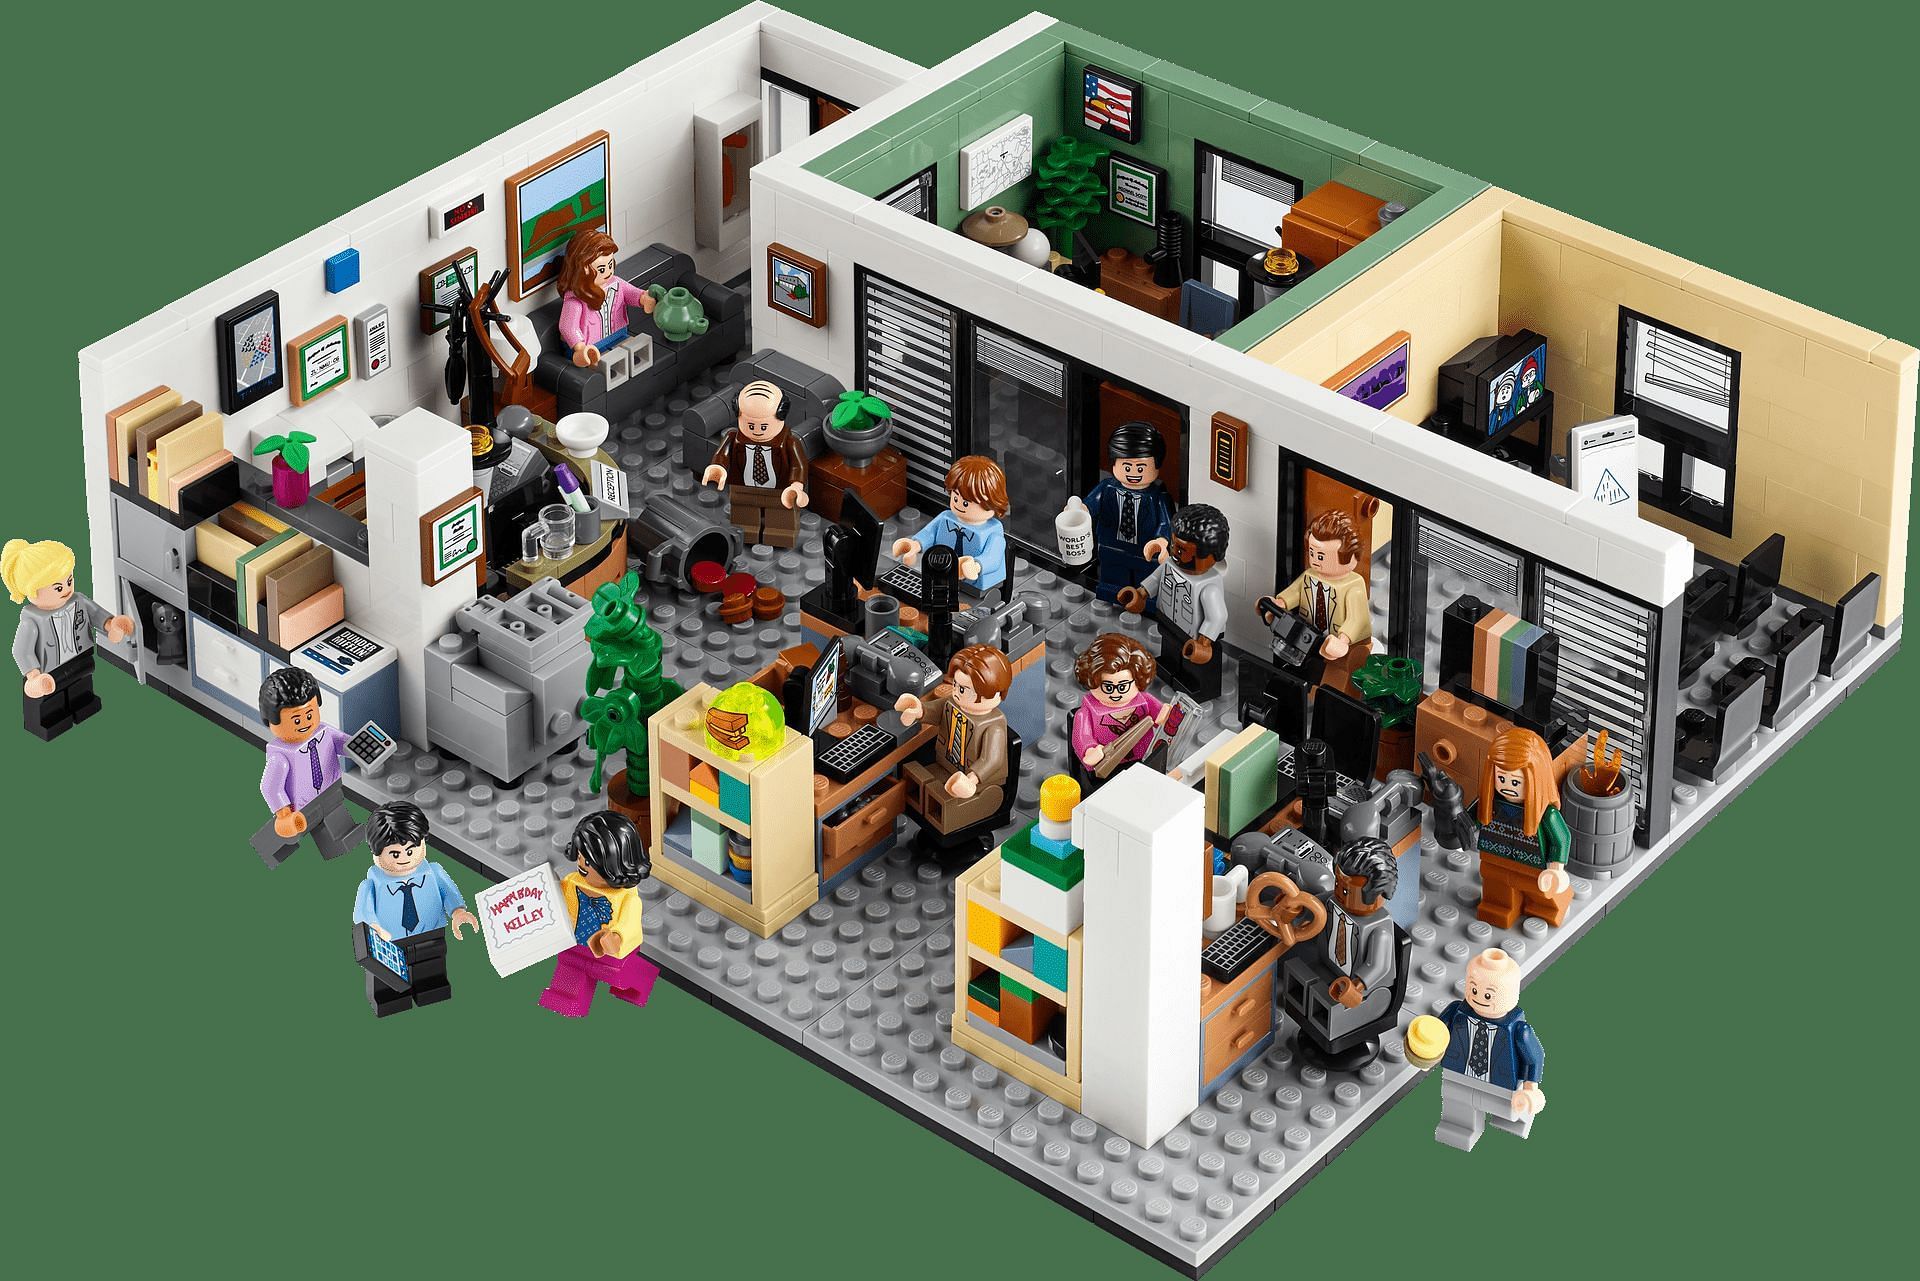 The layout of the set (Image via The Lego Group)